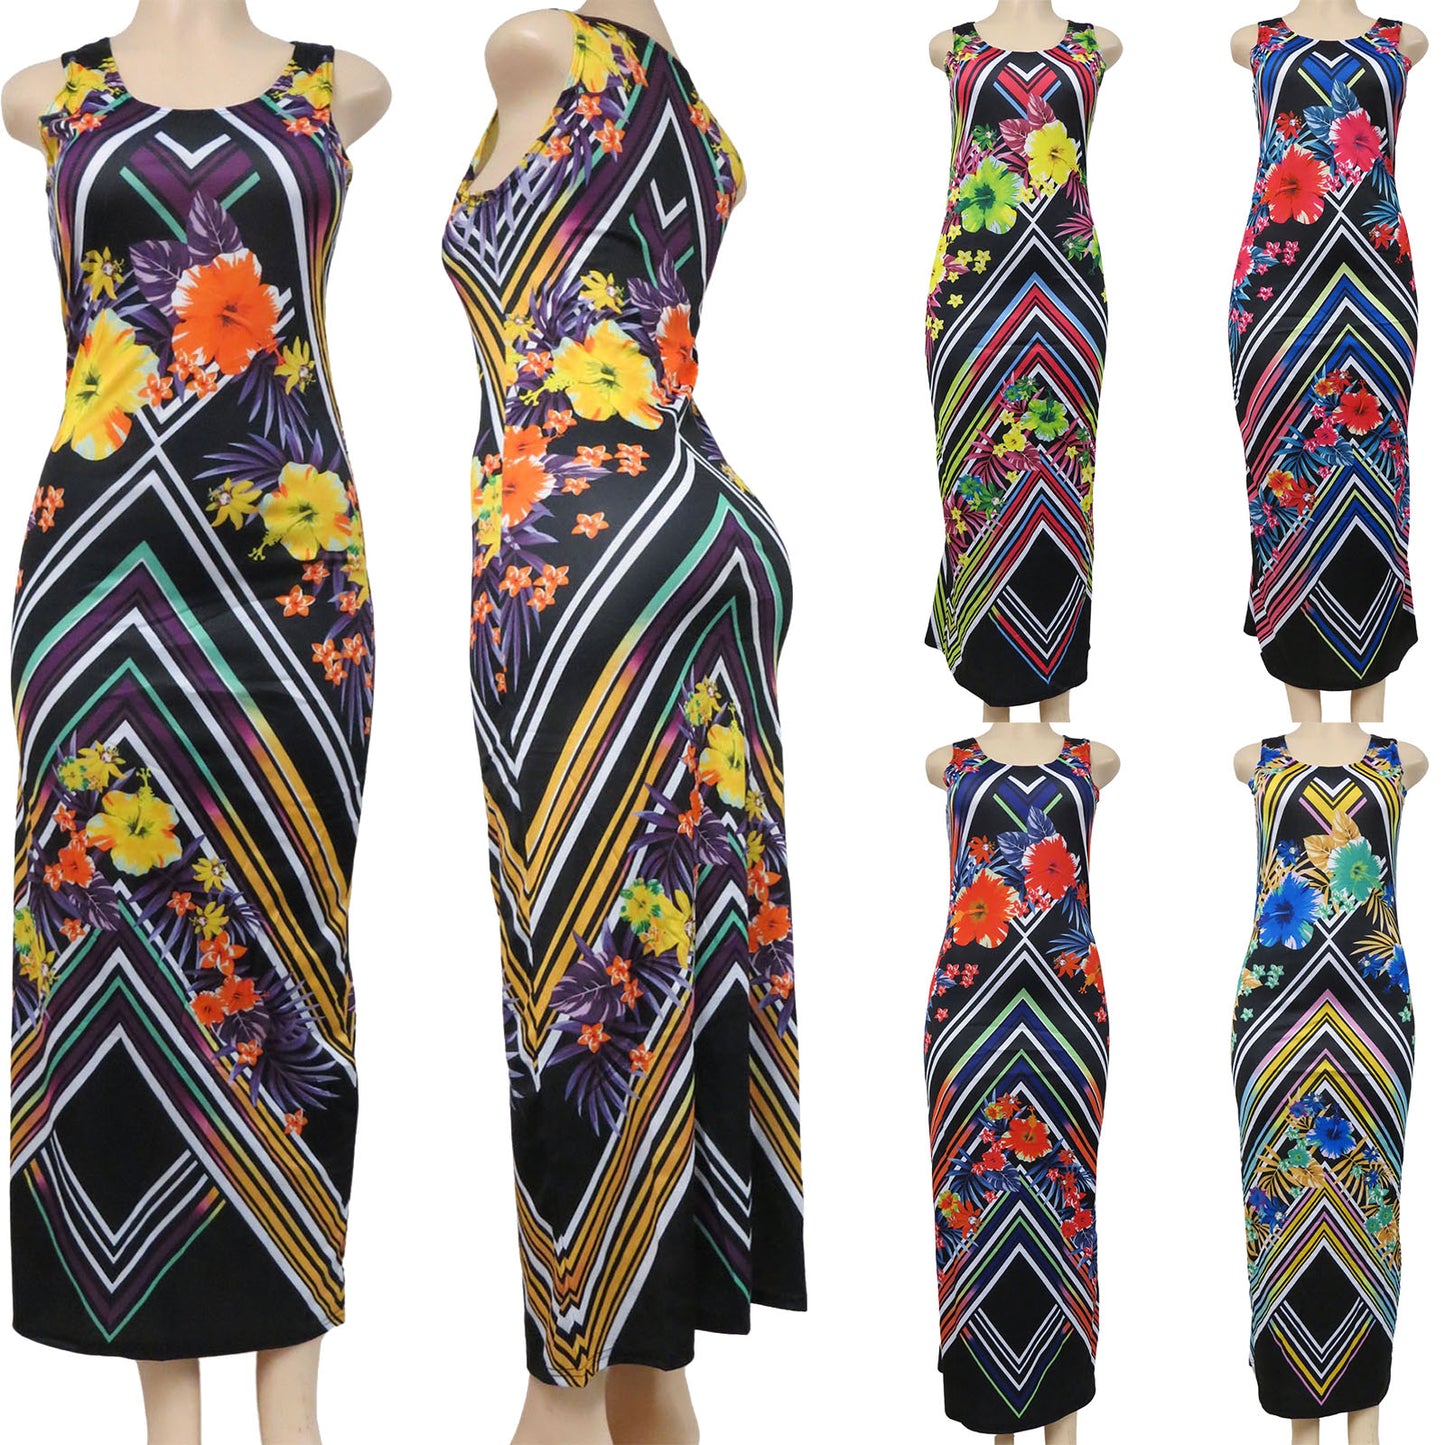 wholesale long sleeveless dress for women in an abstract pattern with assorted colors